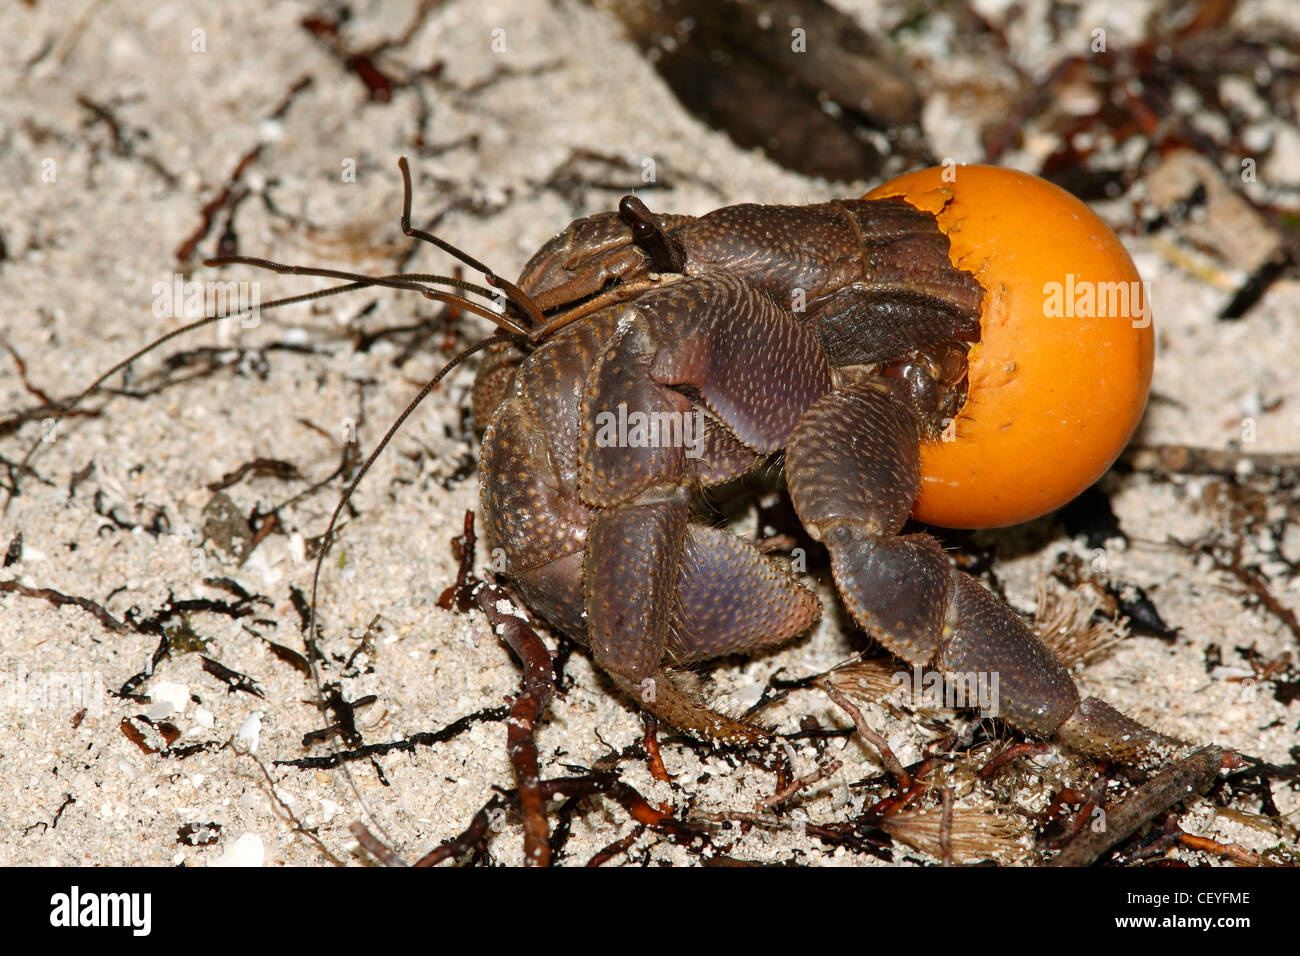 this hermit crab, Coenobita, is using an orange table tennis ball as a protective shell instead of the usual mollusk shell Stock Photo